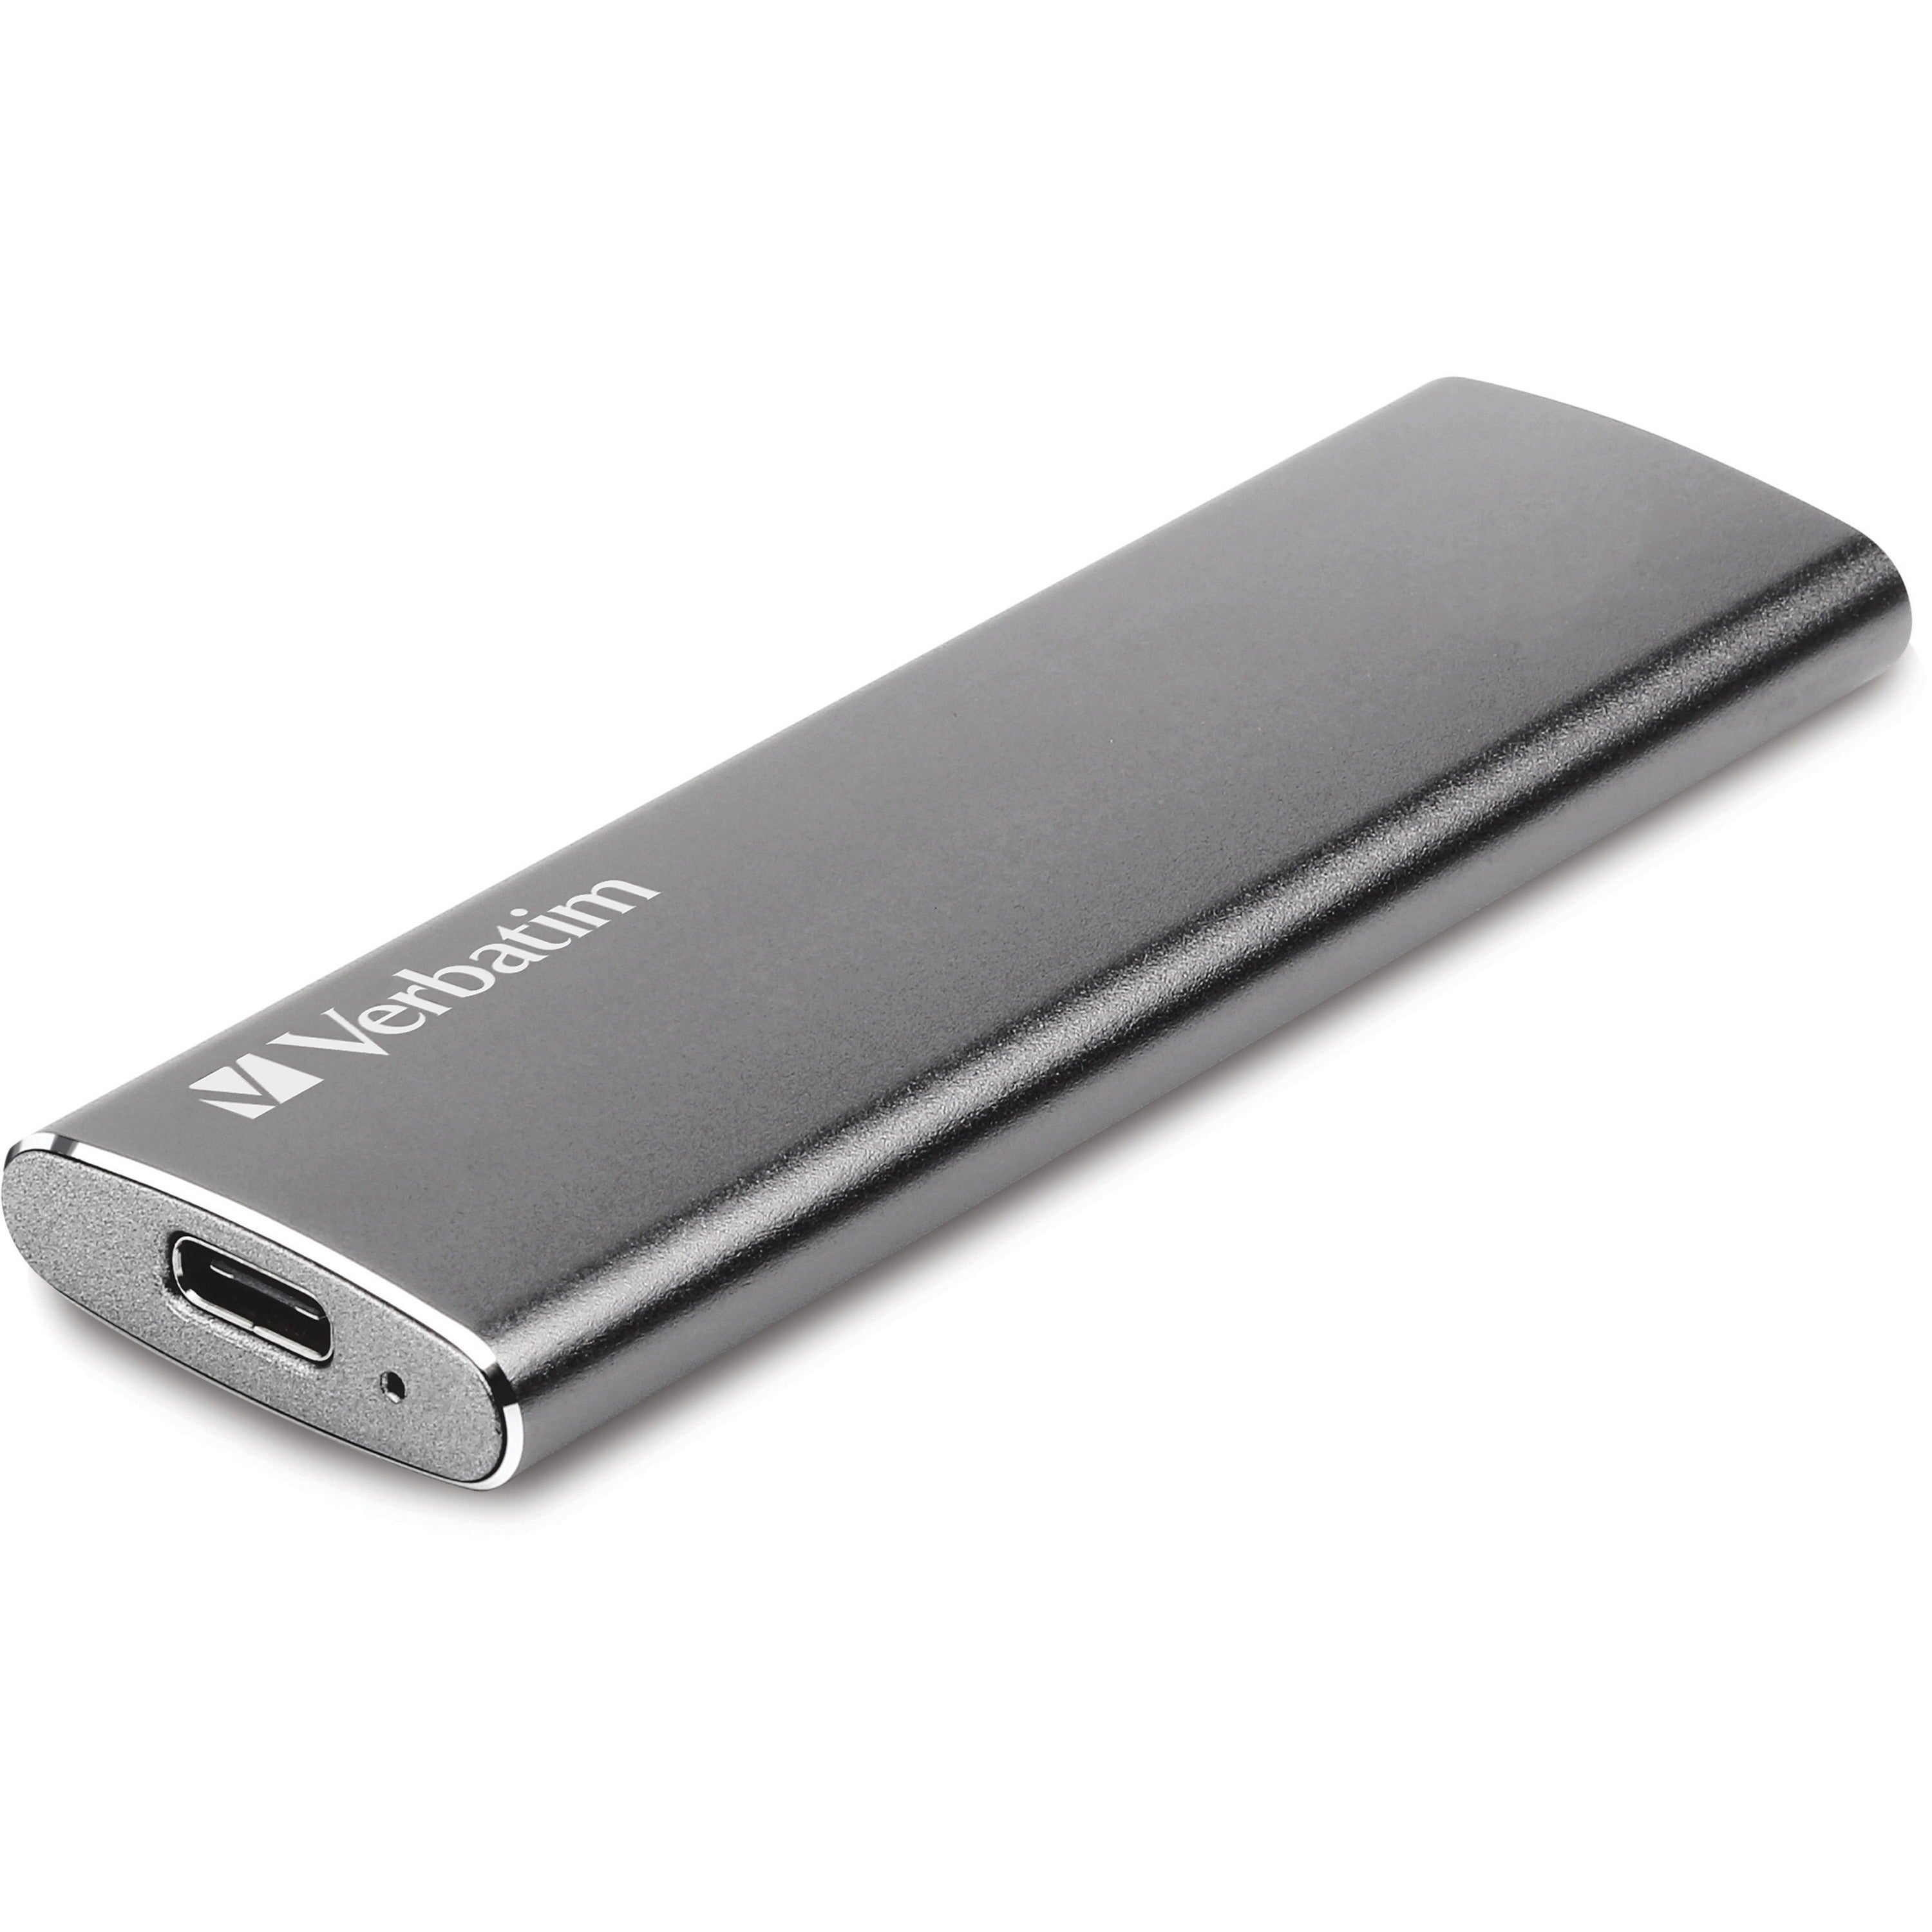 verbatim-240gb-vx500-external-ssd-usb-31-gen-2-graphite-notebook-device-supported-usb-31-type-c-500-mb-s-maximum-read-transfer-rate-2-year-warranty_ver47442 - 1